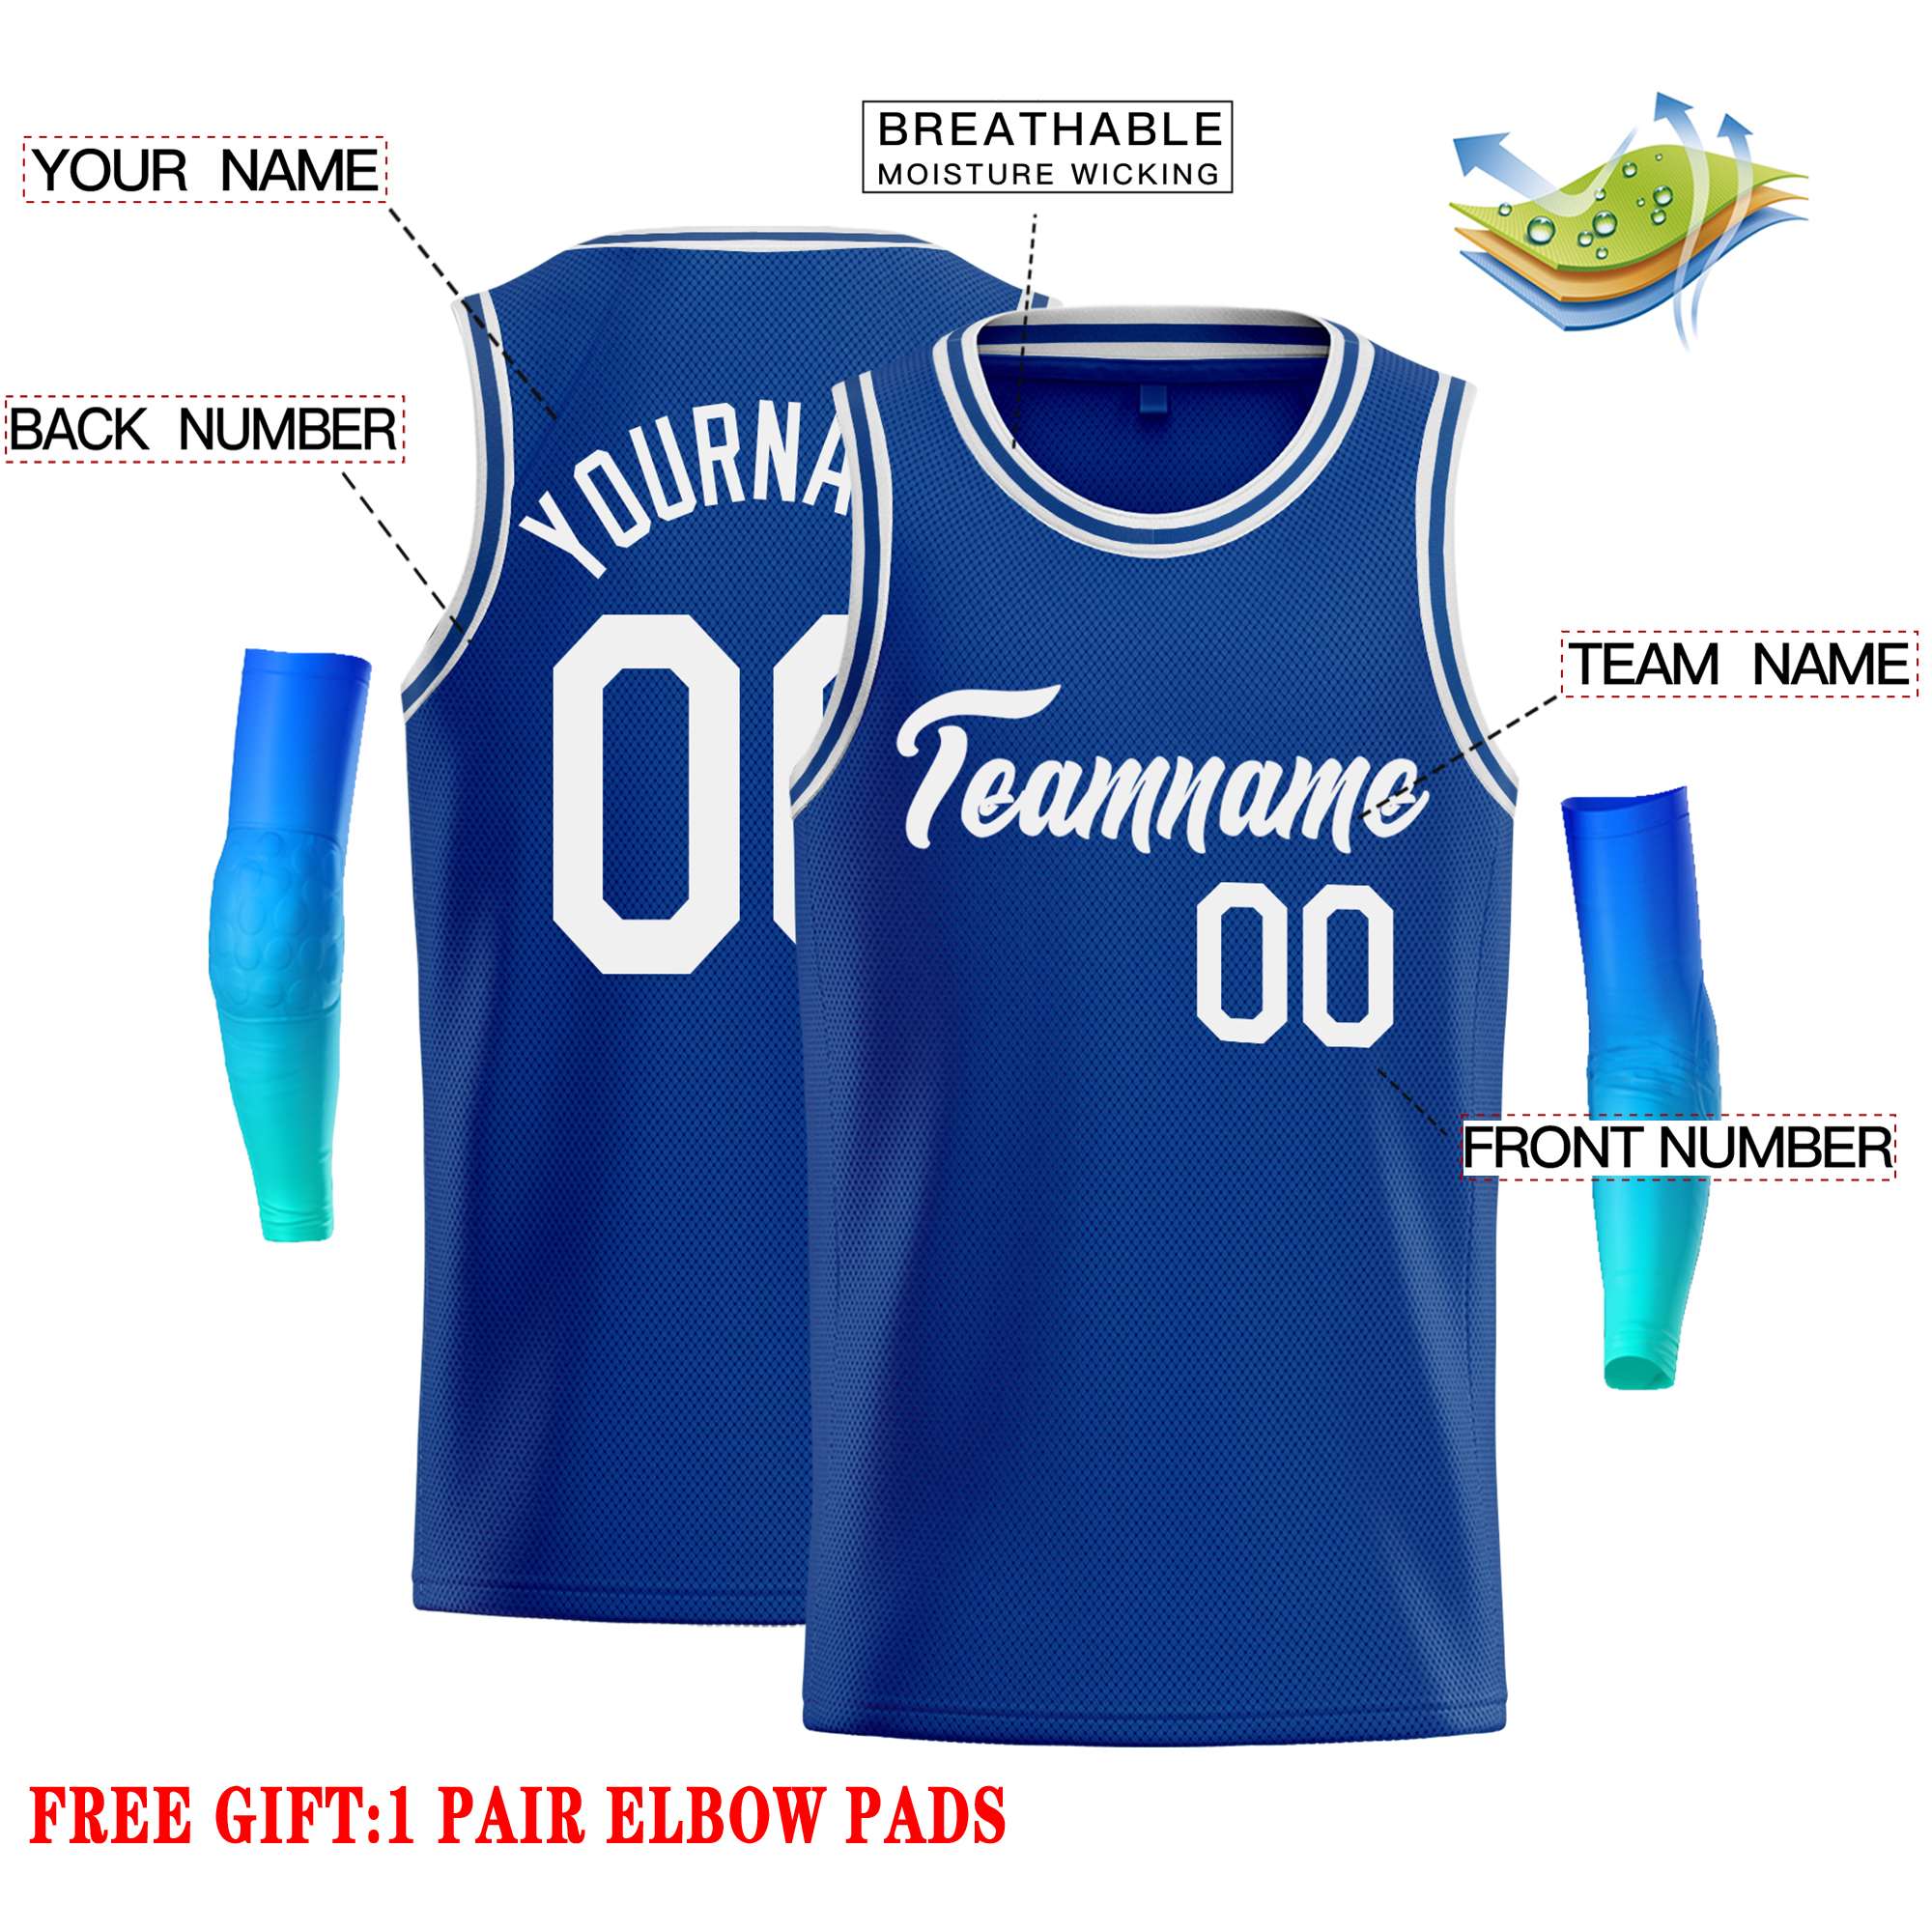 Custom Royal White Classic Tops Casual Basketball Jersey